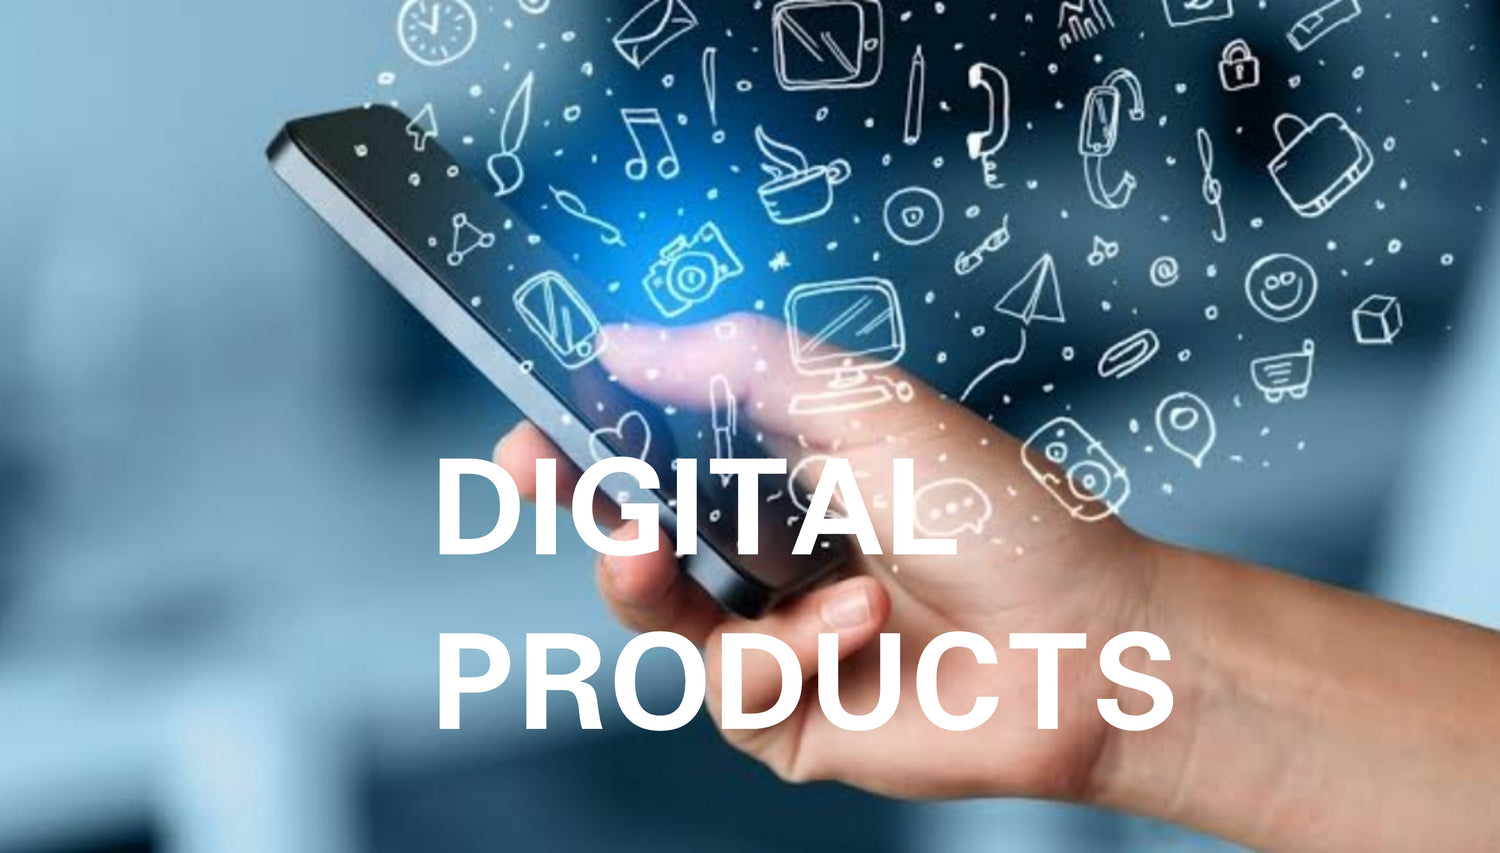 DIGITAL products